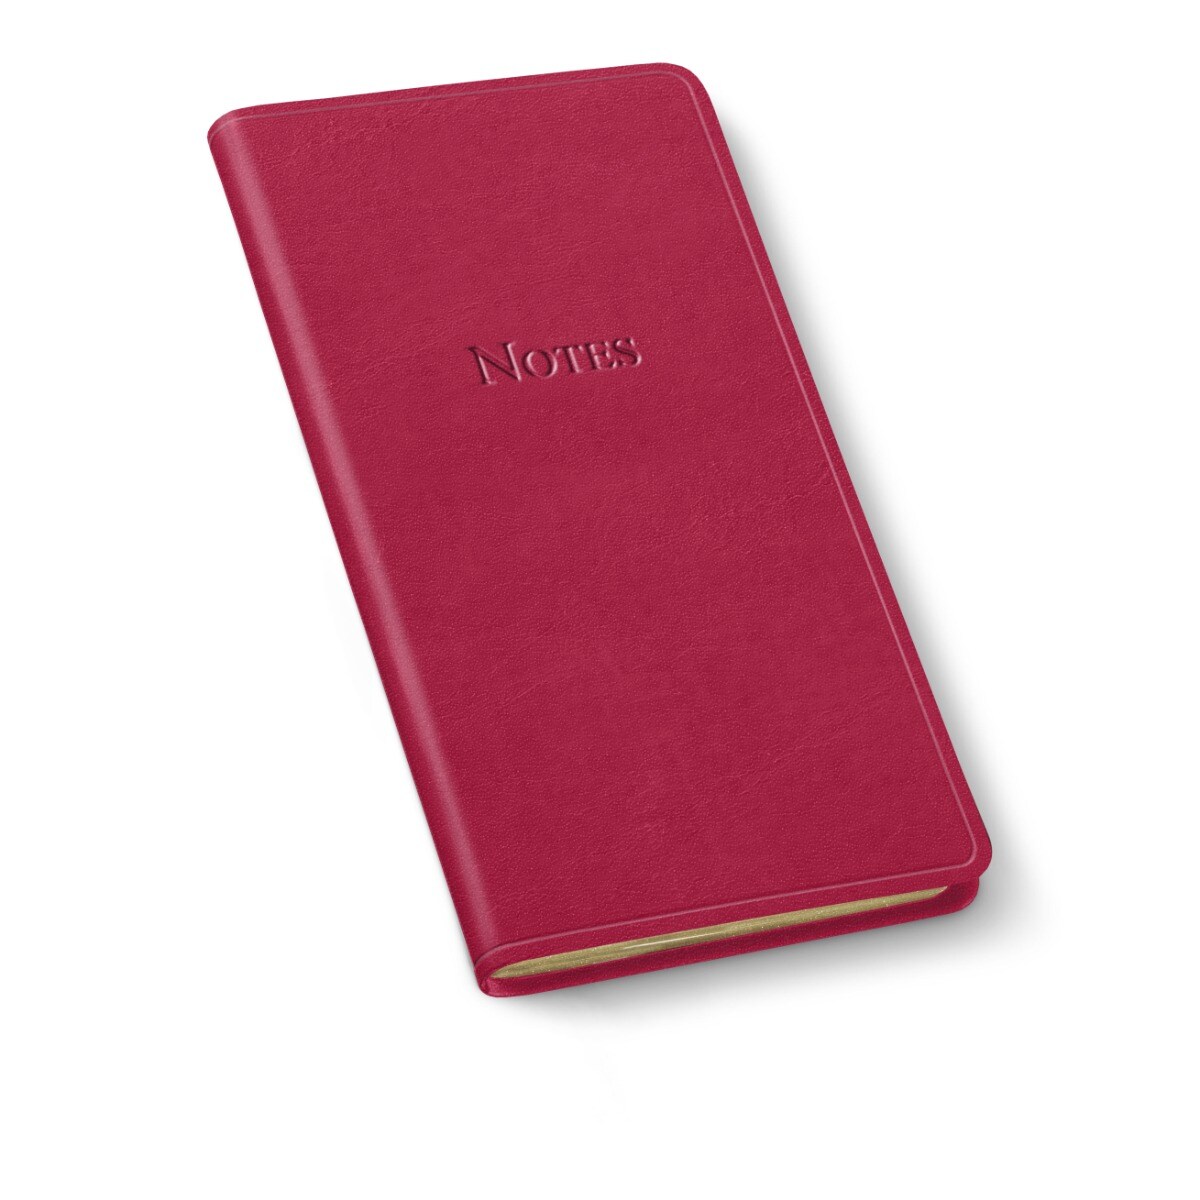 Pocket Notes Leather Journal by Gallery Leather - 6"x3.25"